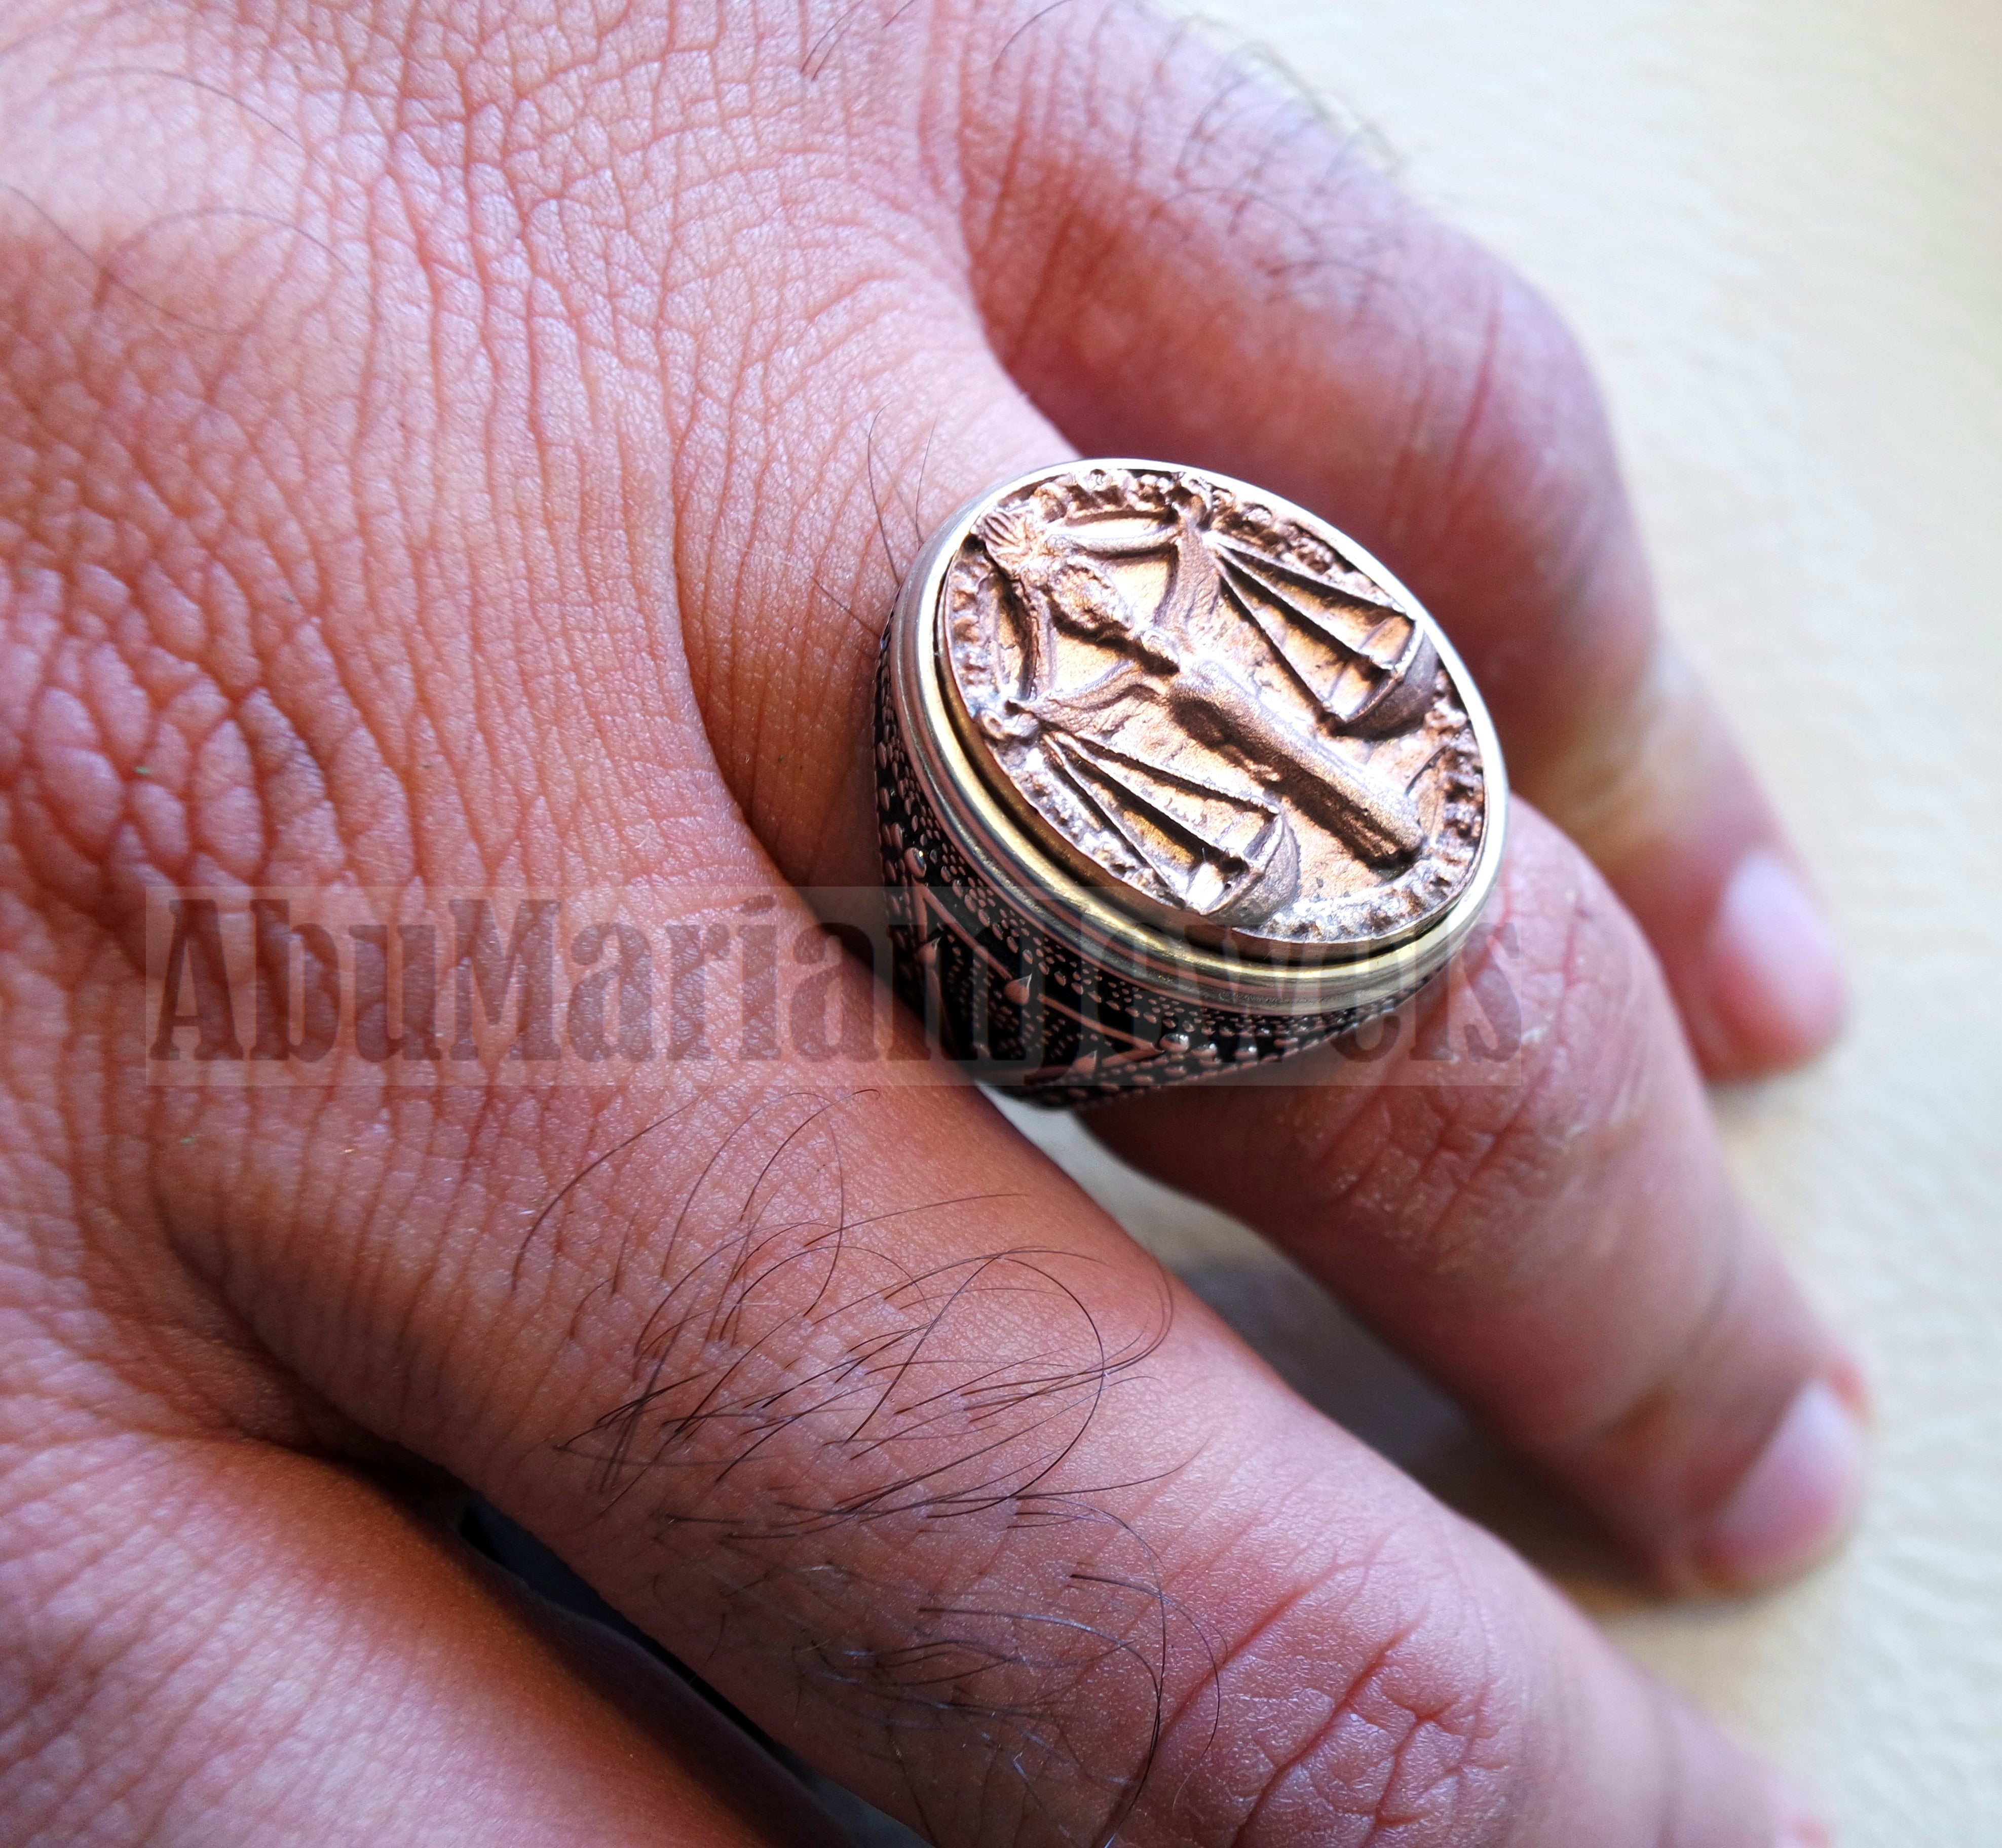 Horoscopes zodiac sign Libra sterling silver 925 and antique bronze huge men ring all sizes men jewelry gift that bring luck fast shipping